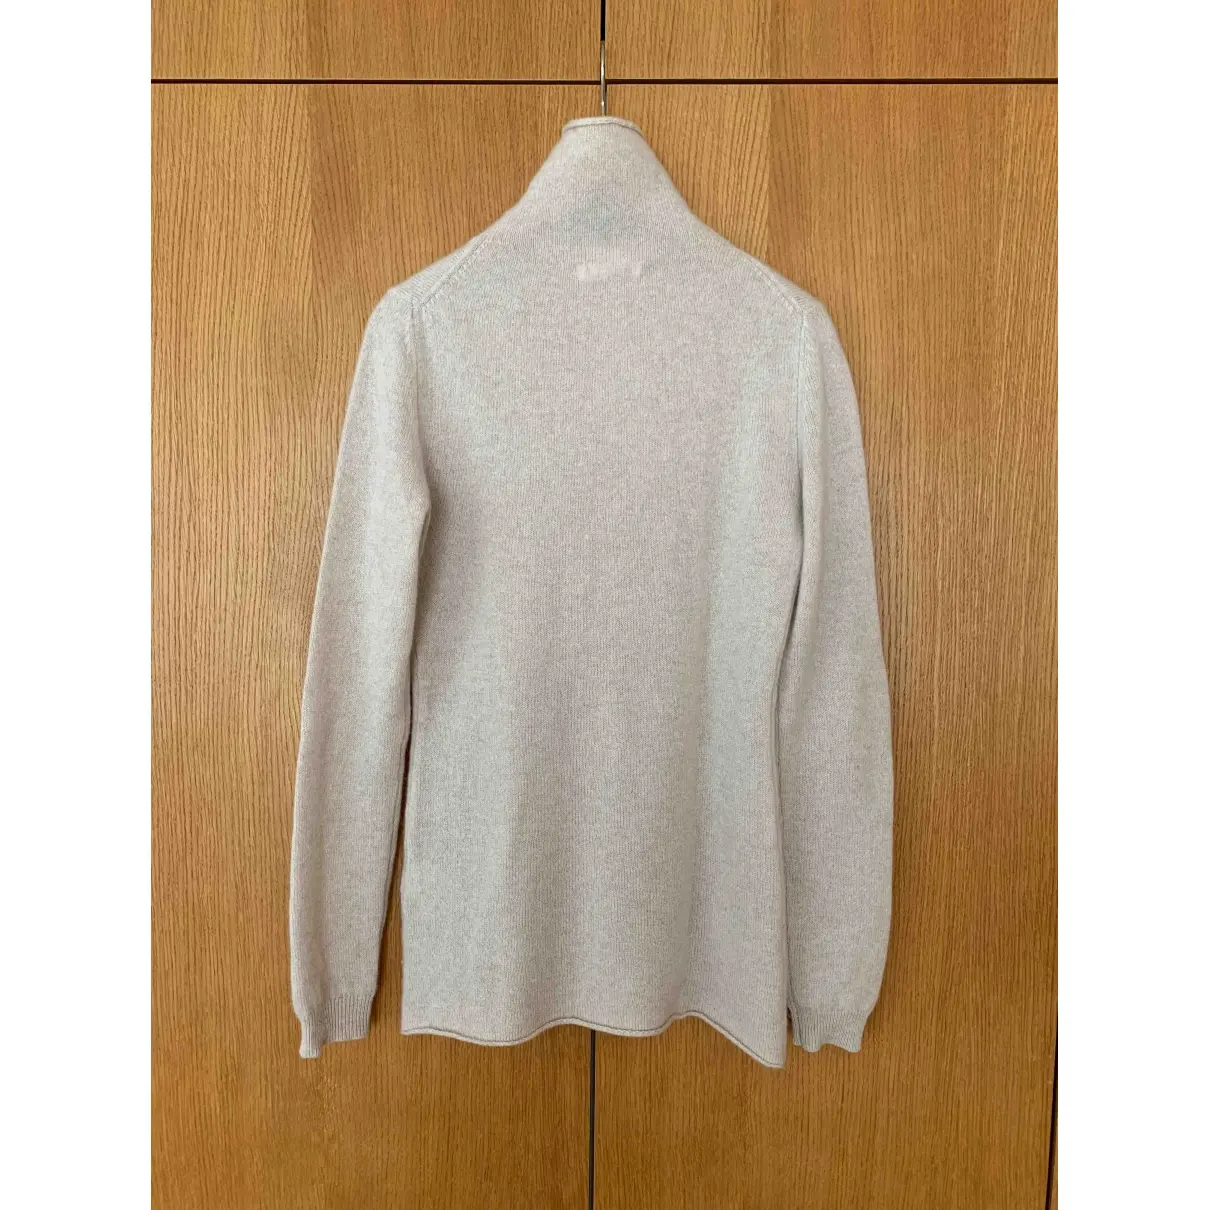 Duffy Cashmere jumper for sale